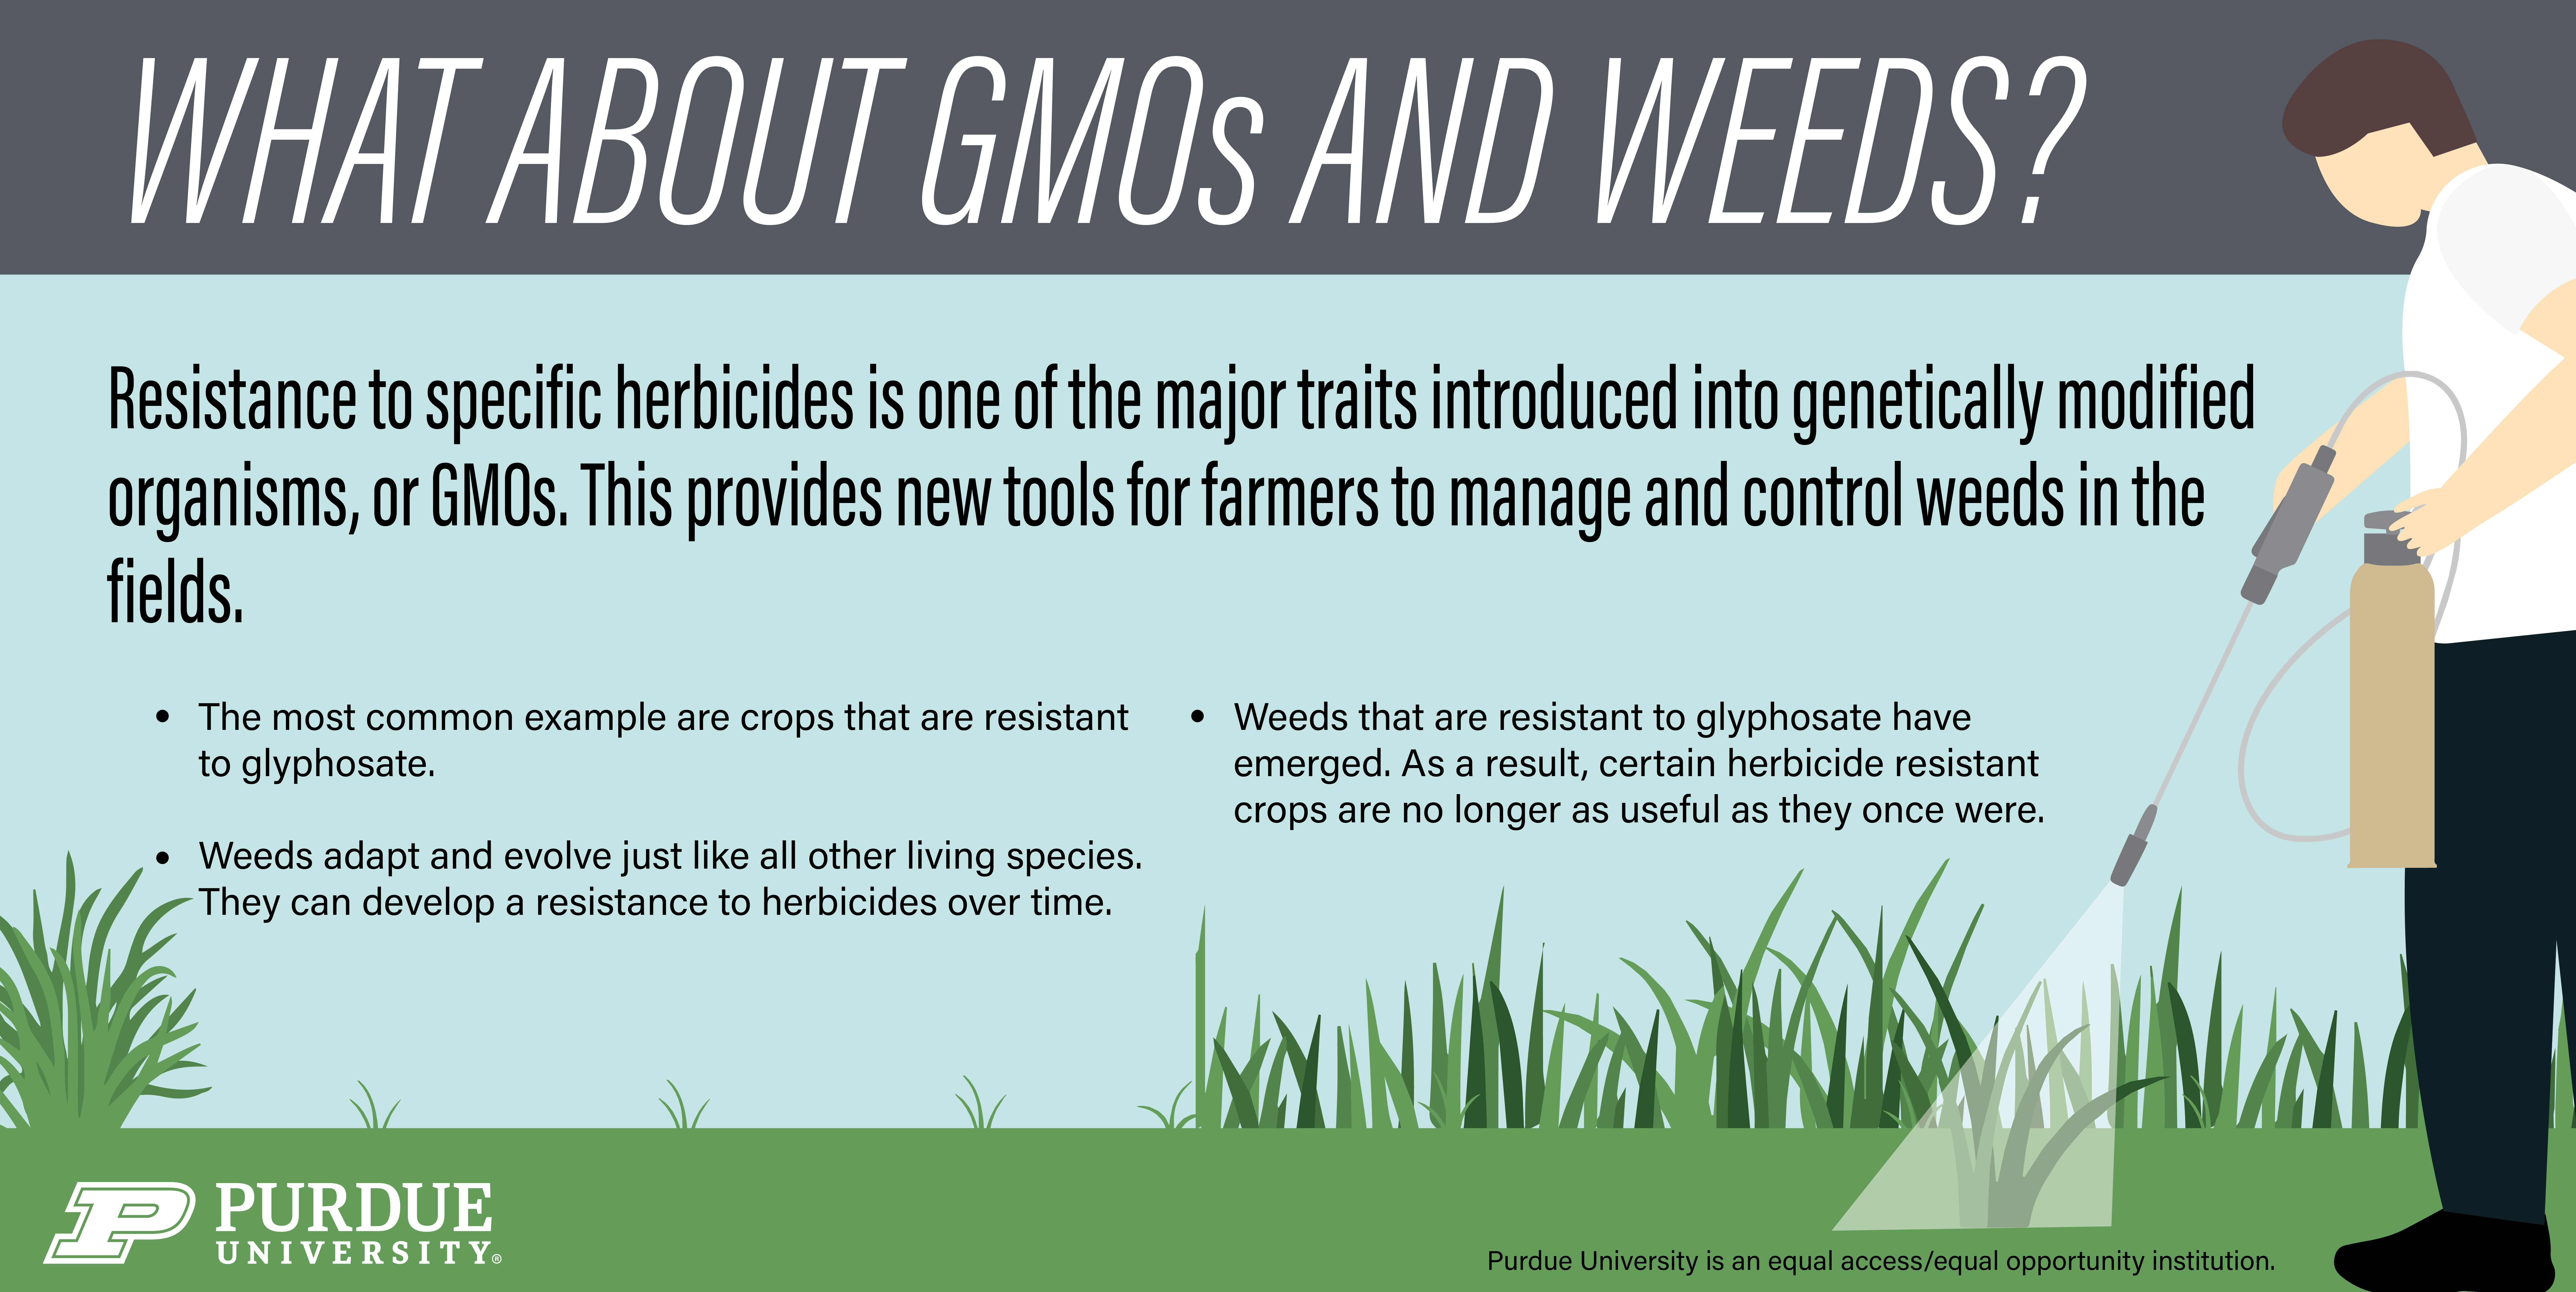 Resistance to specific herbicides is one of the major traits introduced into genetically modified organisms, or GMOs. This provides new tools for farmers to manage and control weeds in the fields